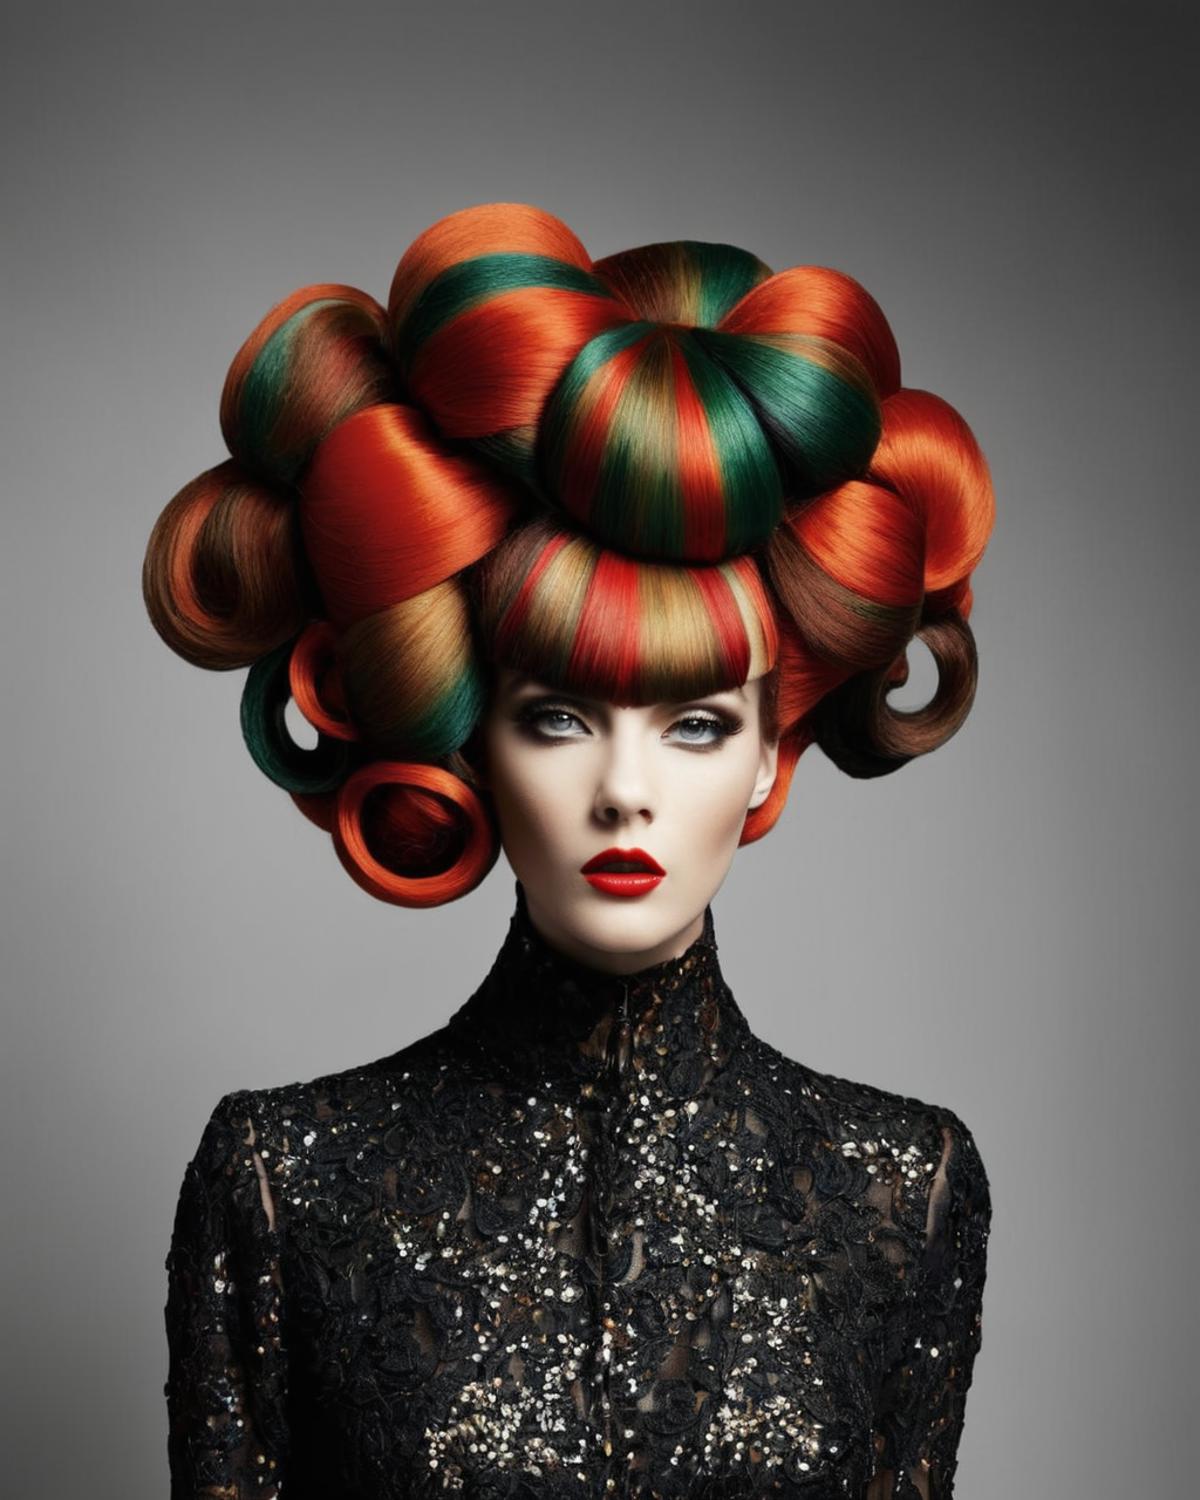 Hair Style image by Ciro_Negrogni